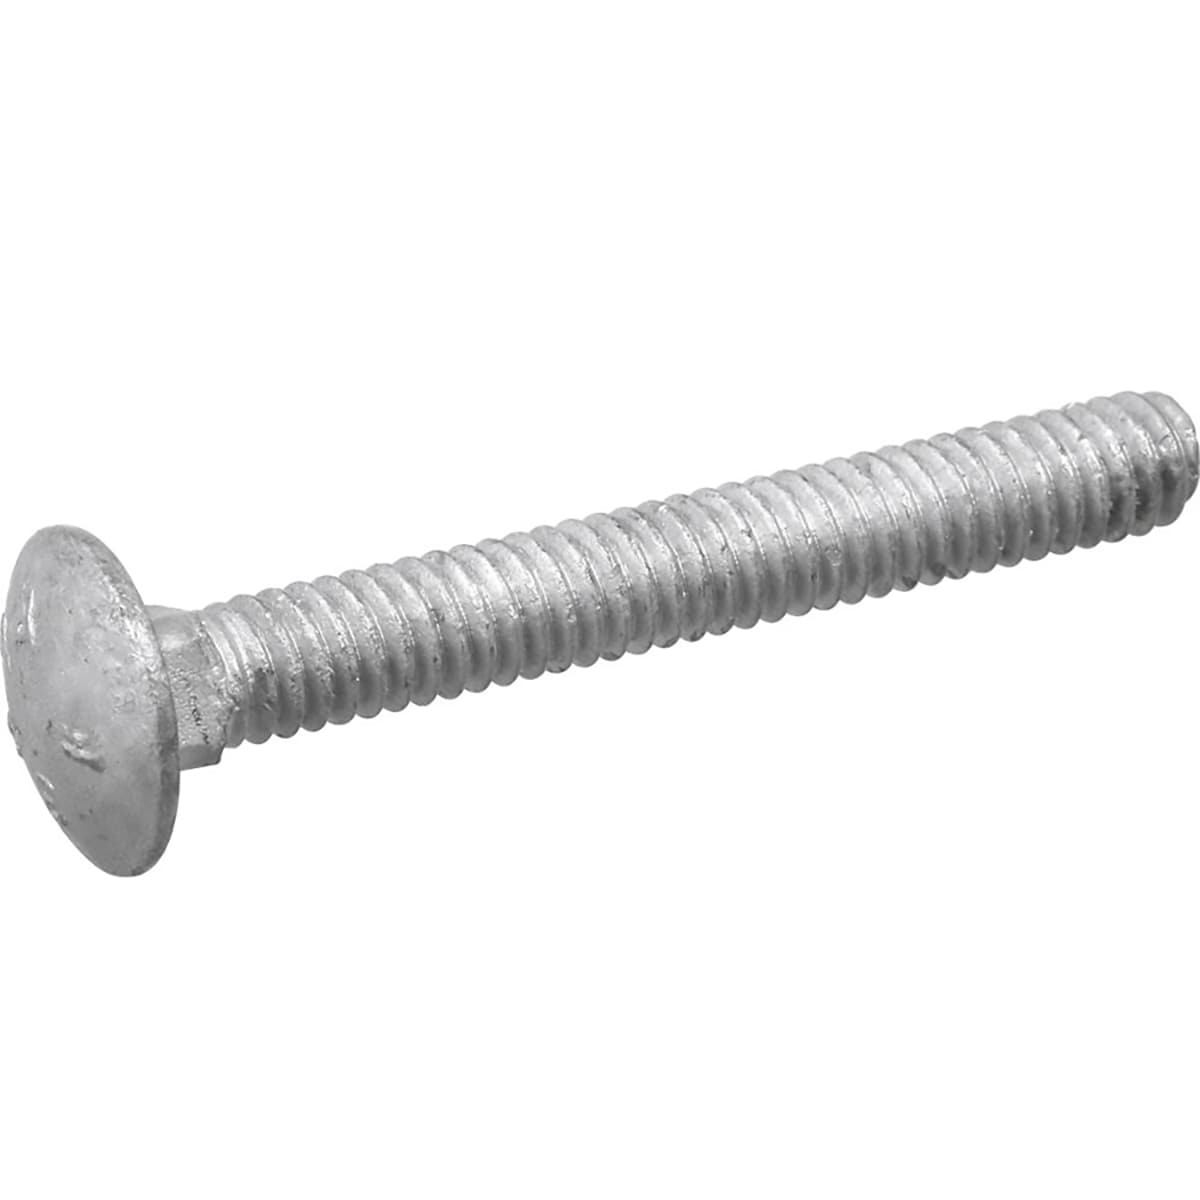 Qty-100 5/8"-11 x 2-1/2" FT Carriage Bolt Hot Dipped Galvanized Bolts 